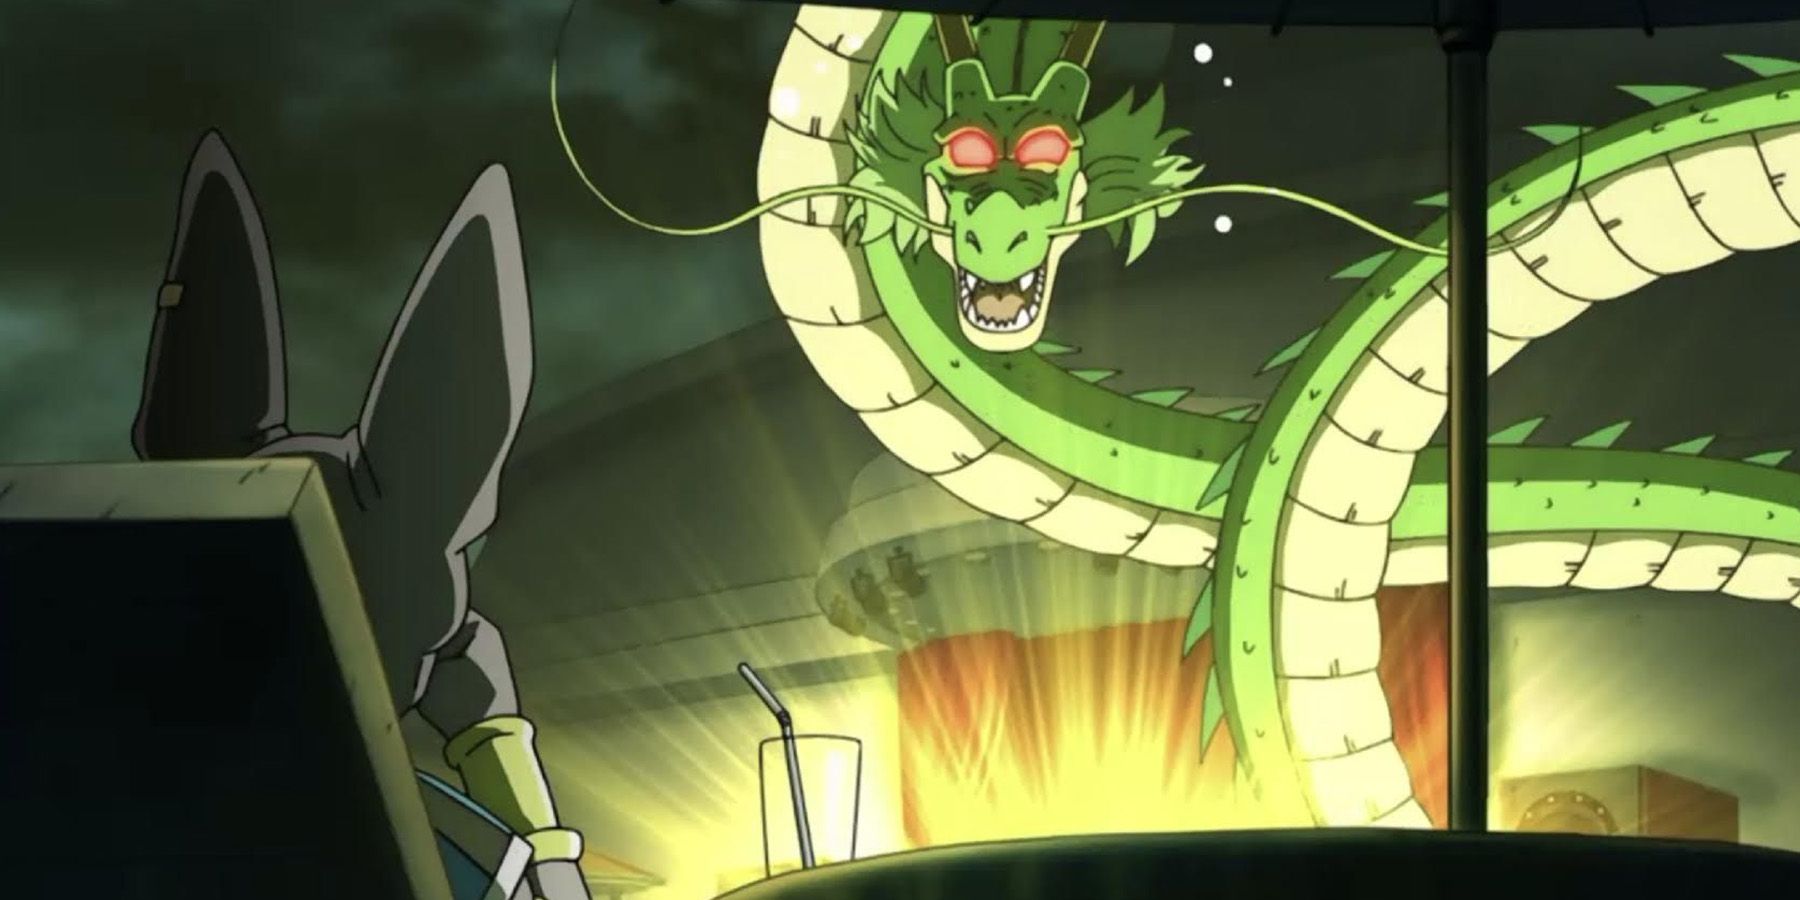 Shenron gets frightened by Beerus' threat in Dragon Ball Super.